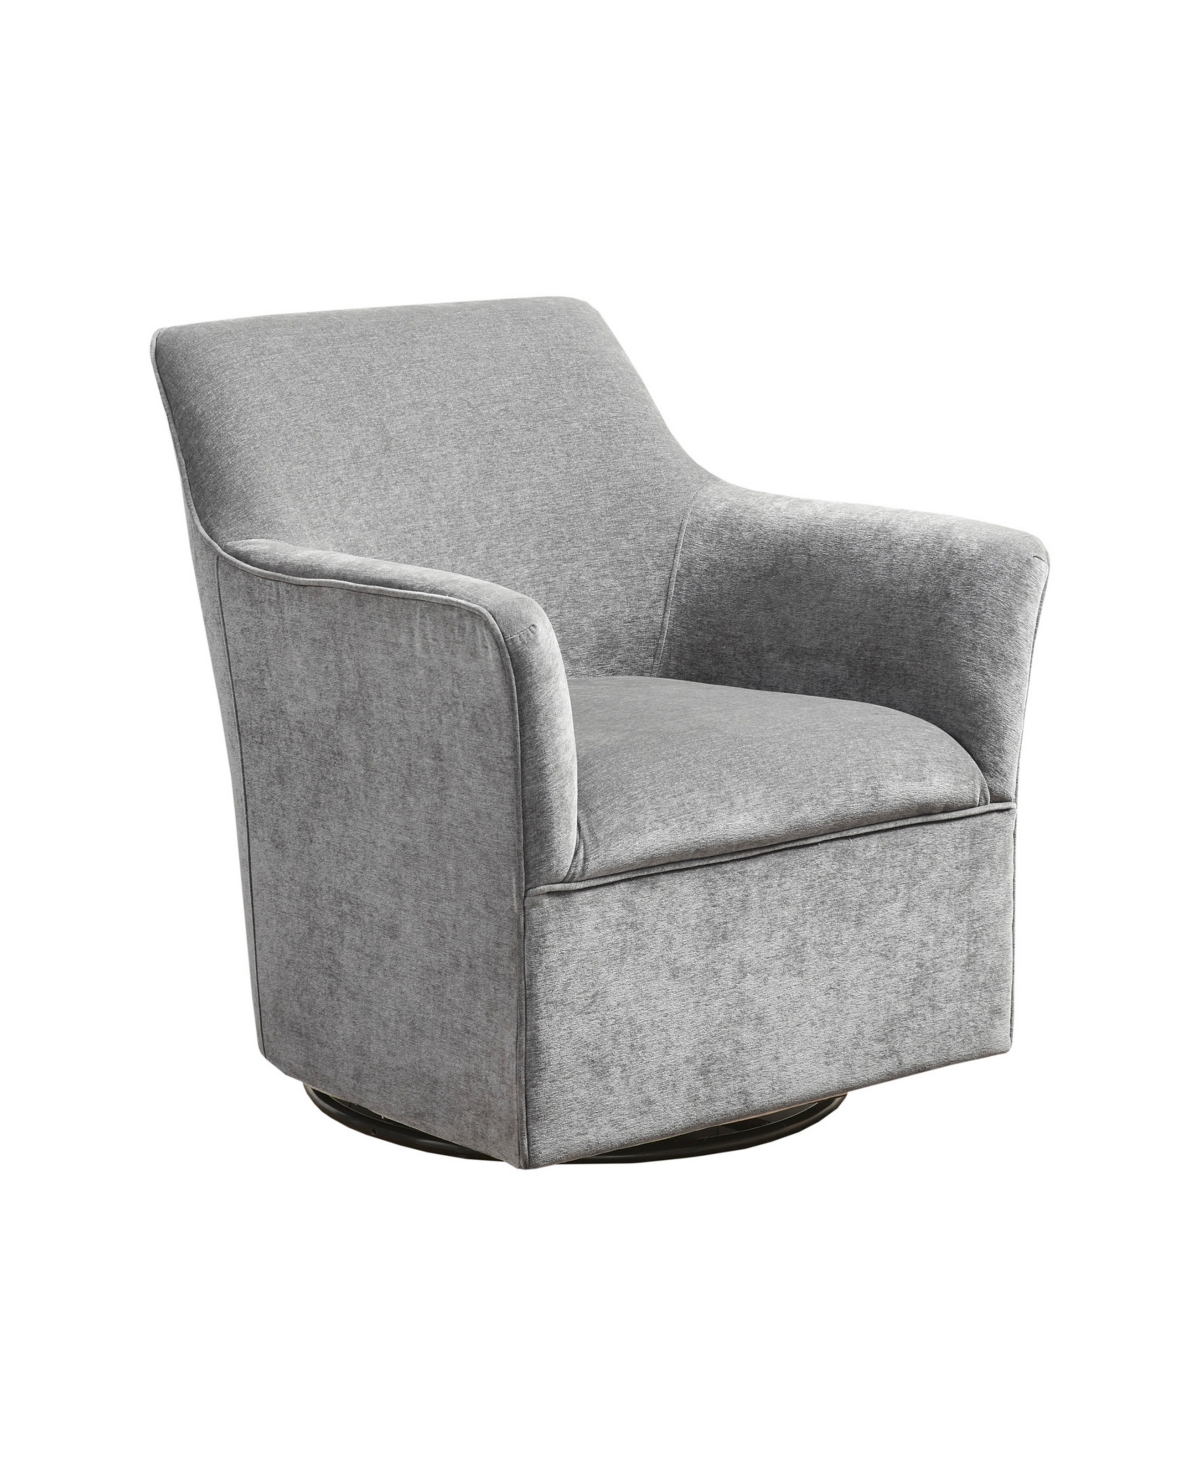 Madison Park Augustine 30.75" Fabric Swivel Glider Chair In Plain Gray